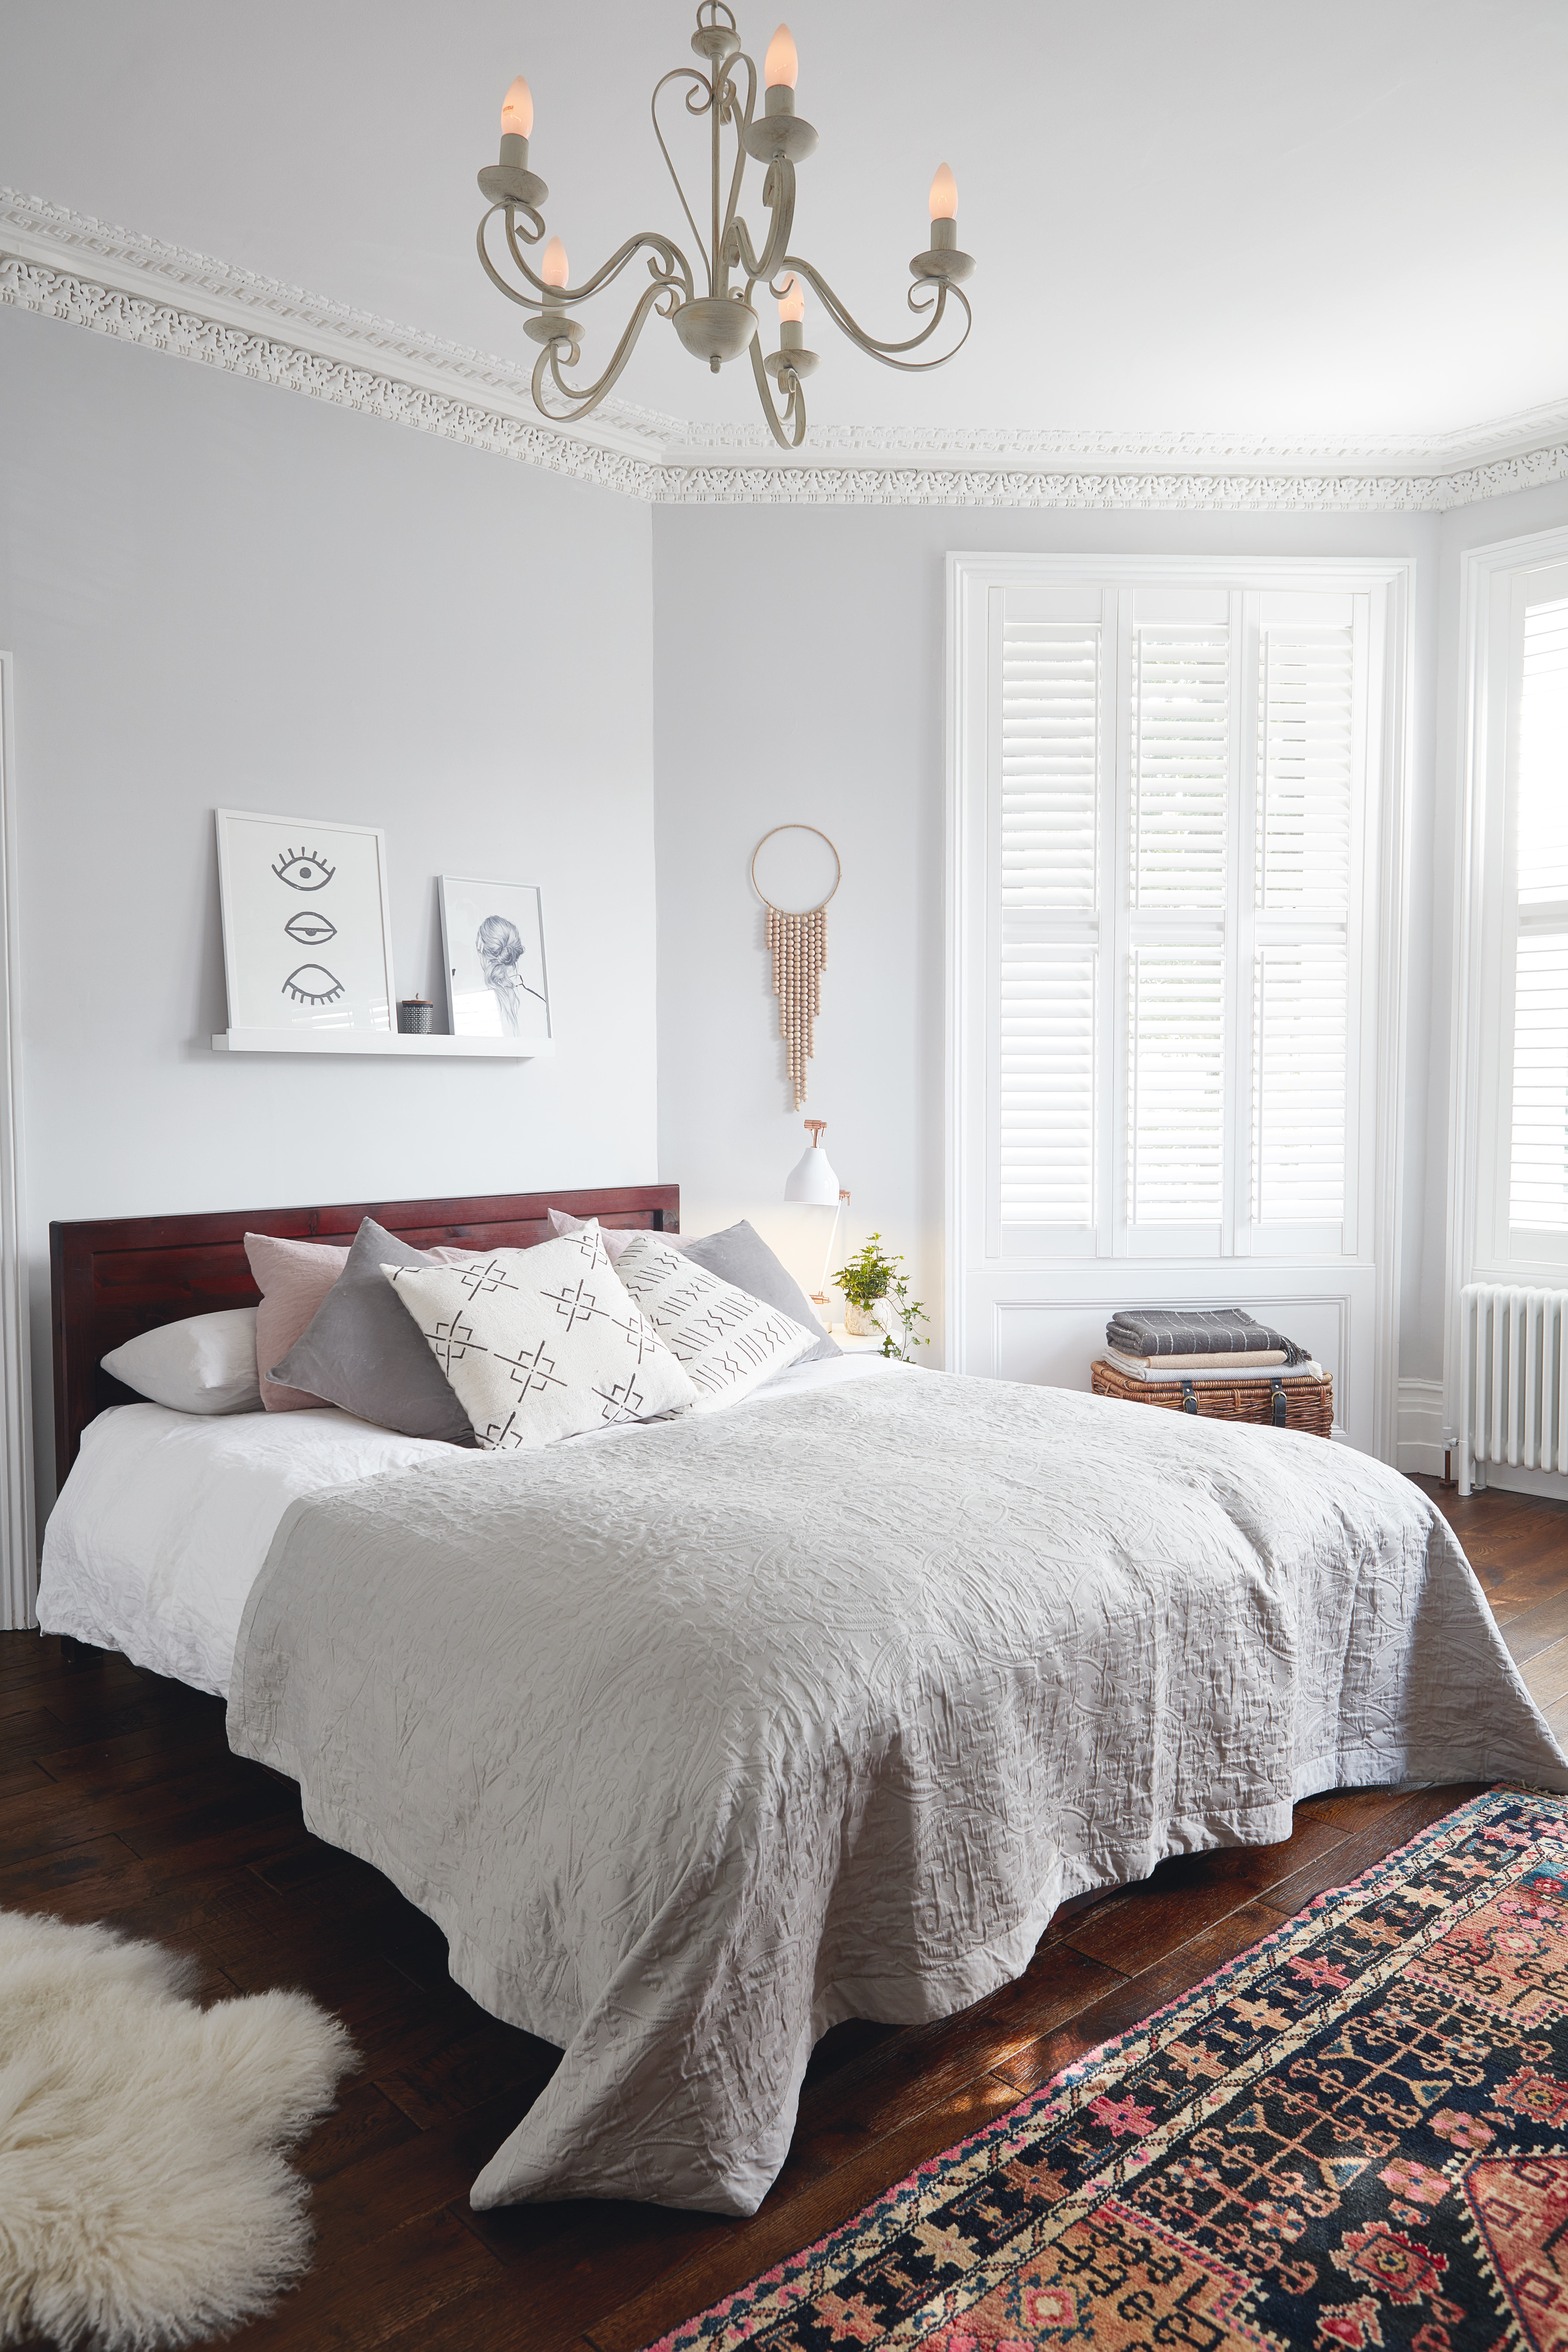 A bedroom with light grey wall paint decor, statement chandelier, shutter window treatment, floating shelves and ethnic rug